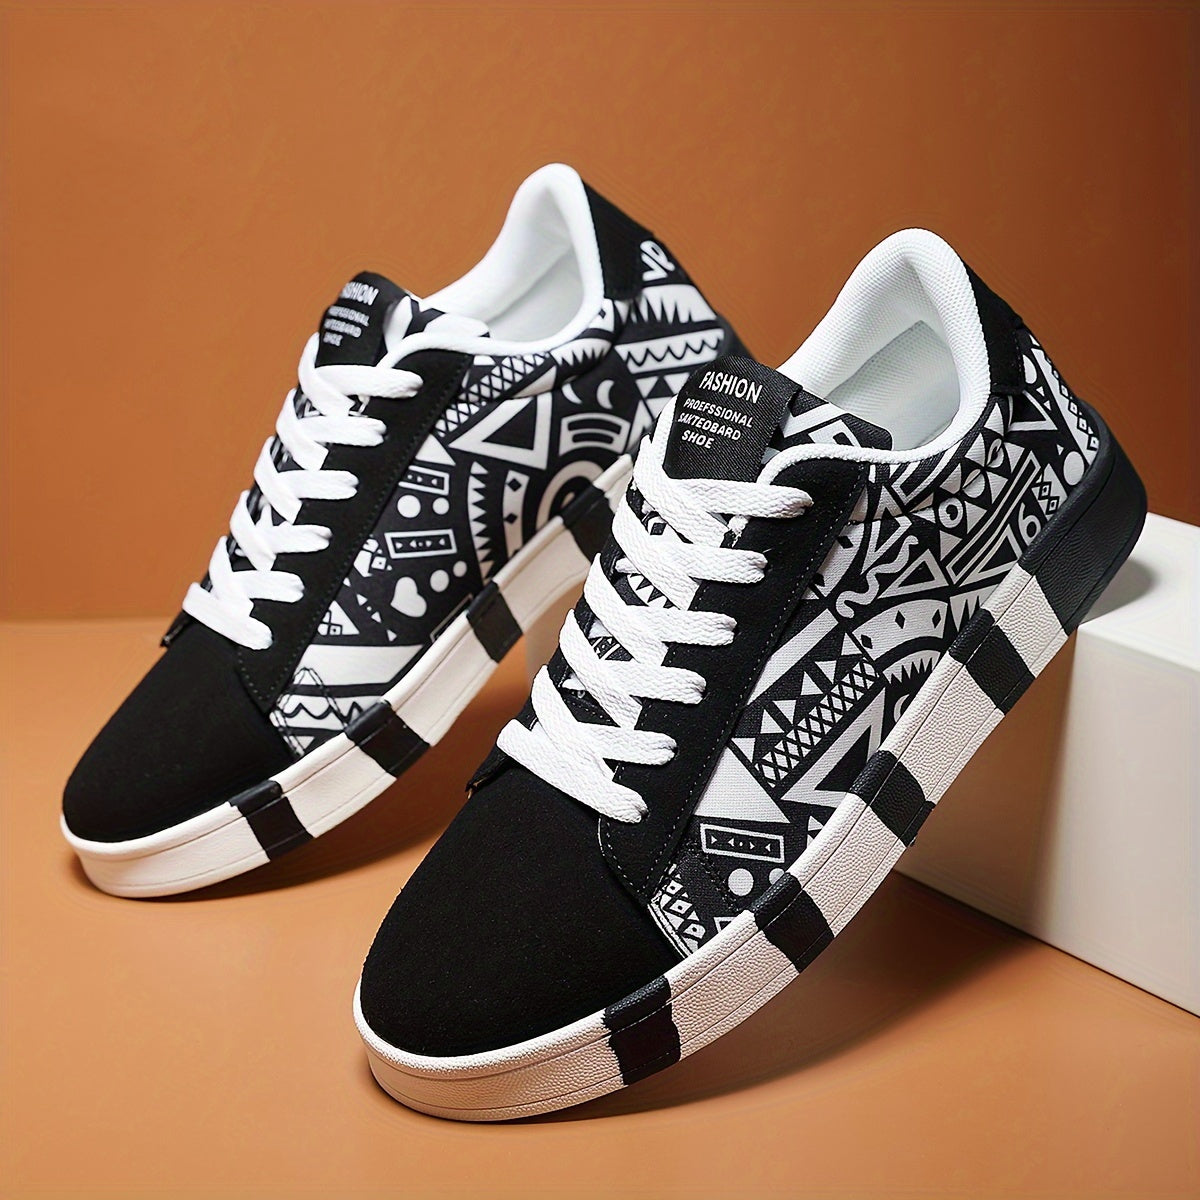 Trendy Skate Shoes - Comfy Non-Slip Casual Sneakers for Men's Outdoor Activities